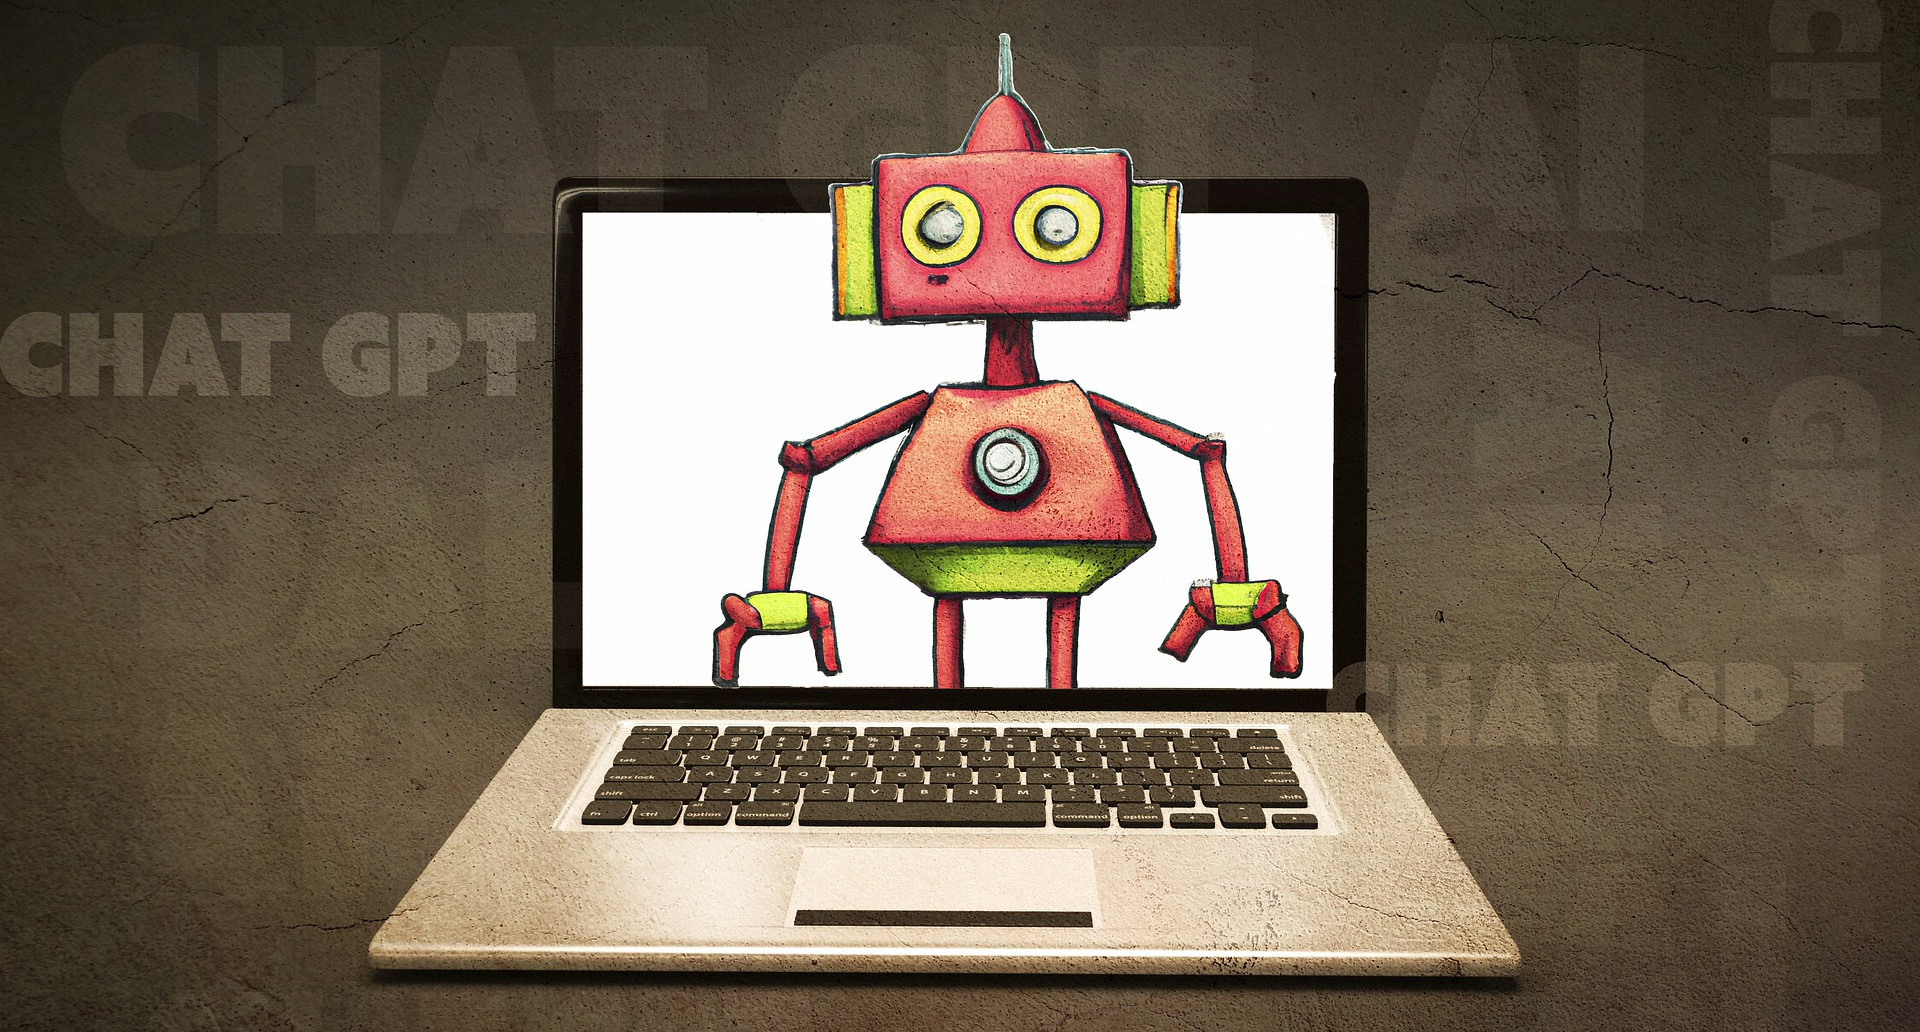 Cartoon robot on a laptop with "ChatGPT" text behind it